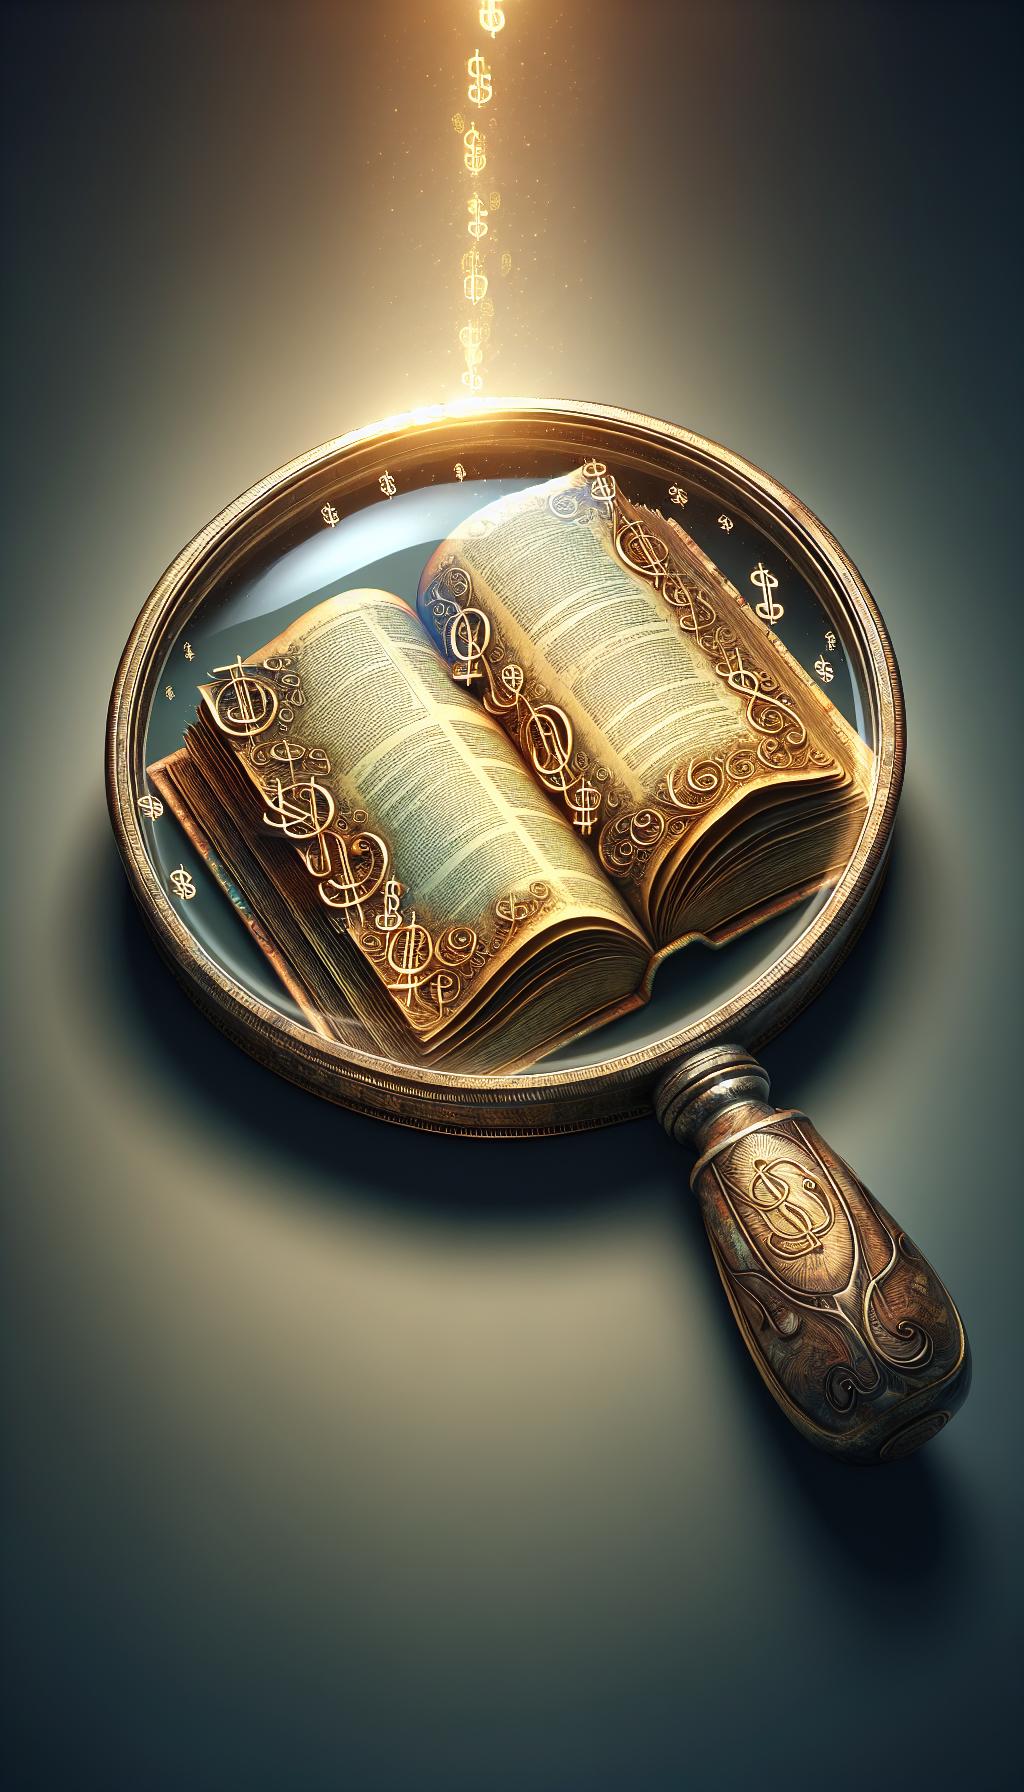 A magnifying glass hovers over an open, antiquarian book, with clearly visible signs of wear along its spine and edges. Each flaw shines under the lens, transformed into gleaming gold lines, symbolizing the delicate balance between condition and rarity. Intricate dollar signs delicately watermark the page background, subtly implying the book's fluctuating value.